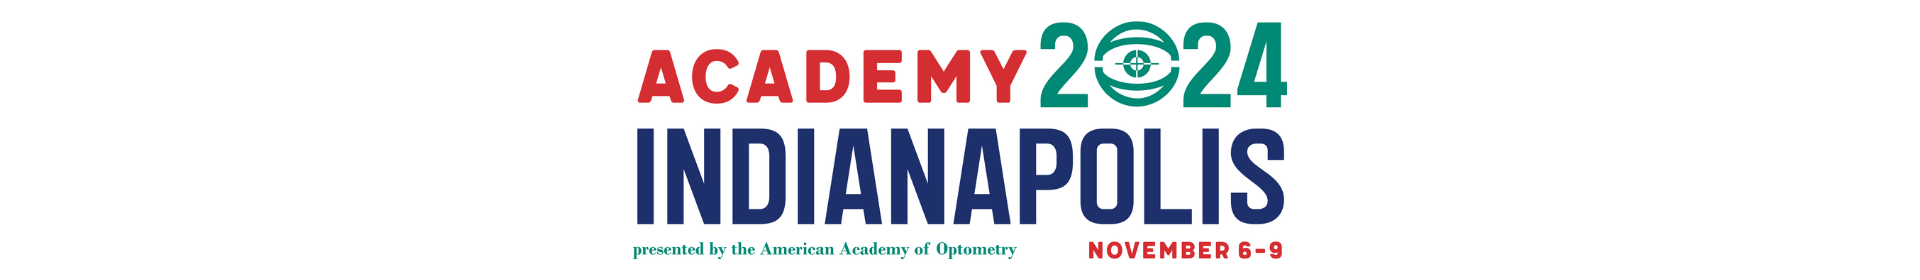 Academy 2024 Indianapolis Event Banner